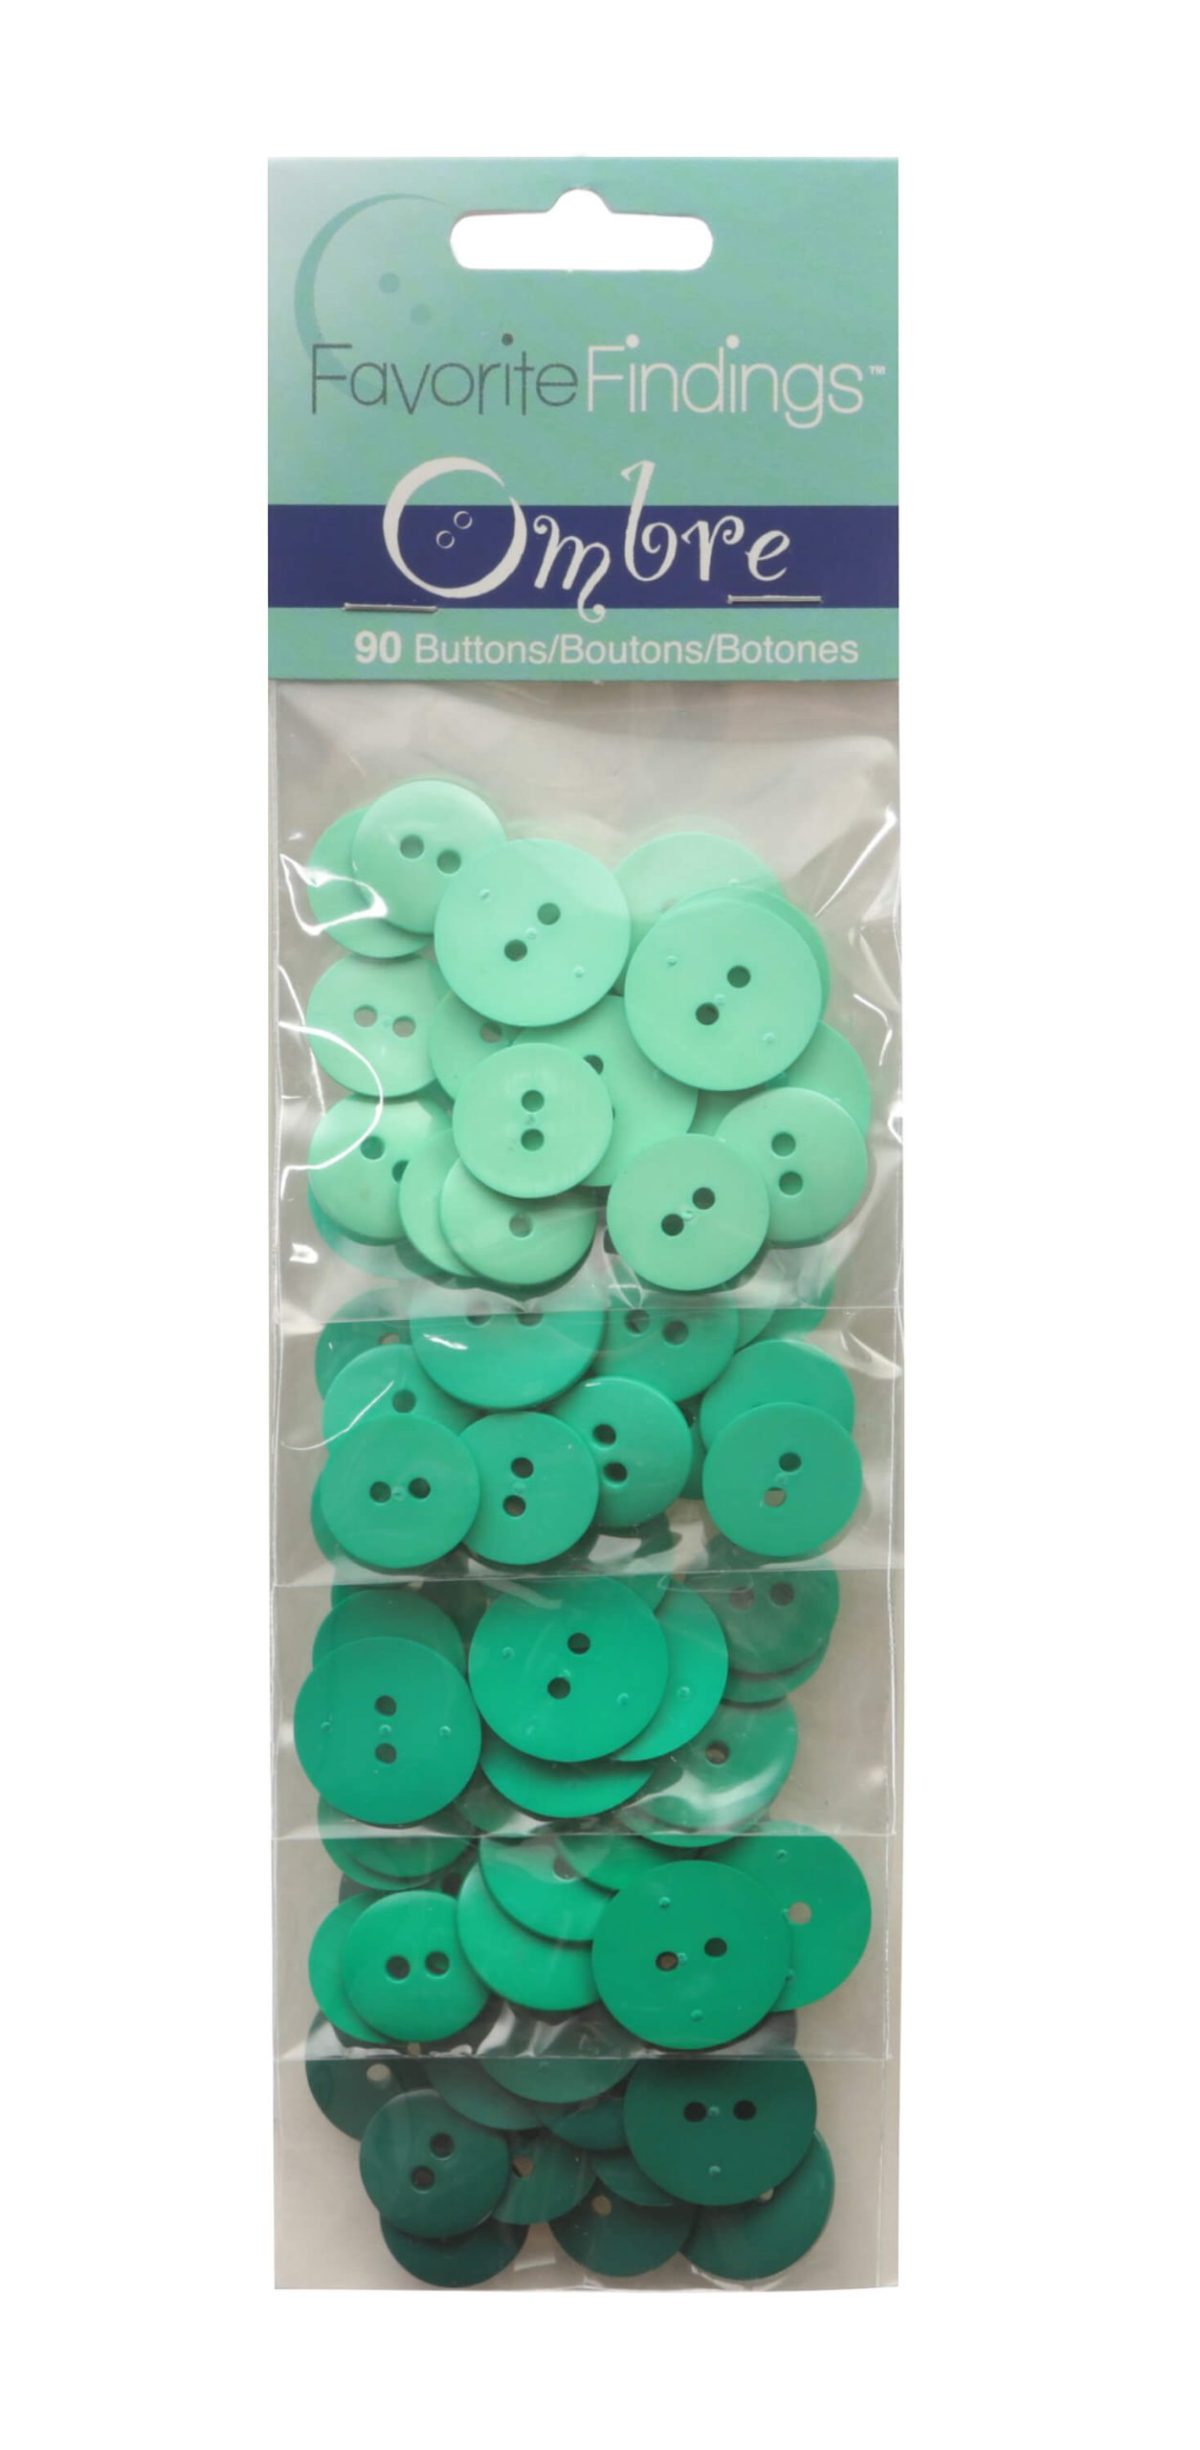 Ombre 90 Button Shade Pack - 5 Shades of Mint & Green 16mm / 19mm Buttons